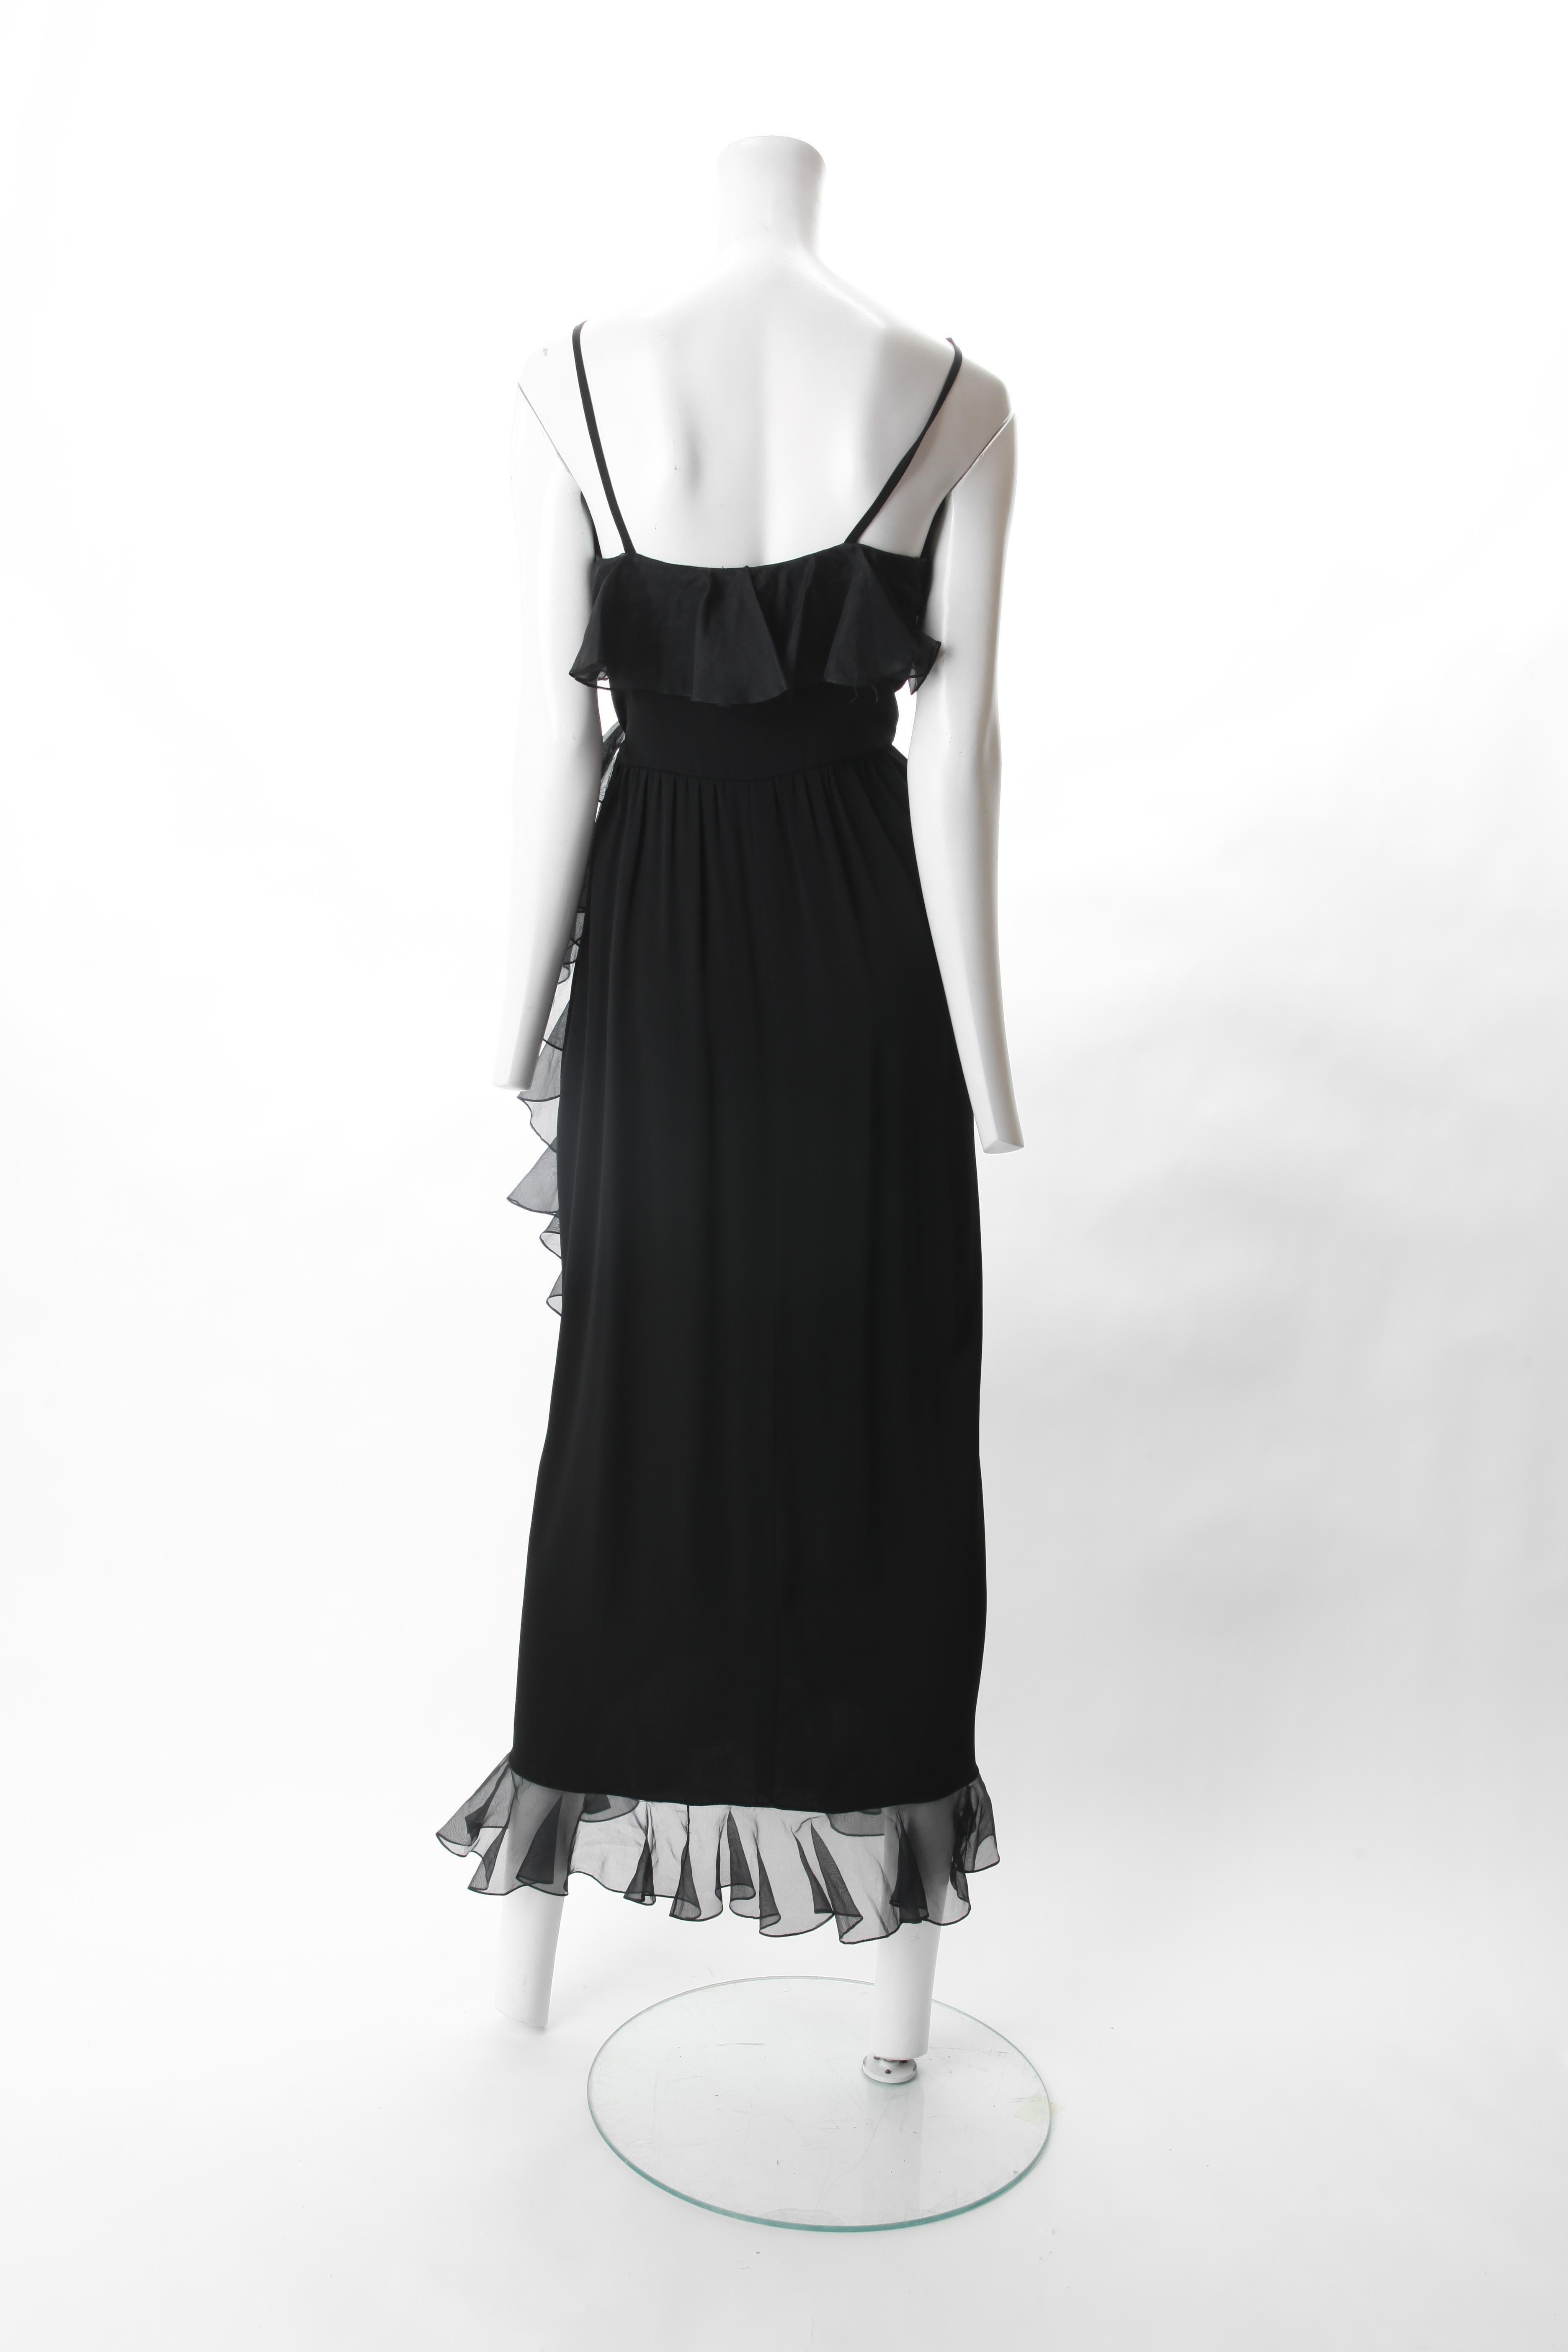 Adele Simpson Black Chiffon Wrap Dress, c.1970s. In Good Condition In New York, NY